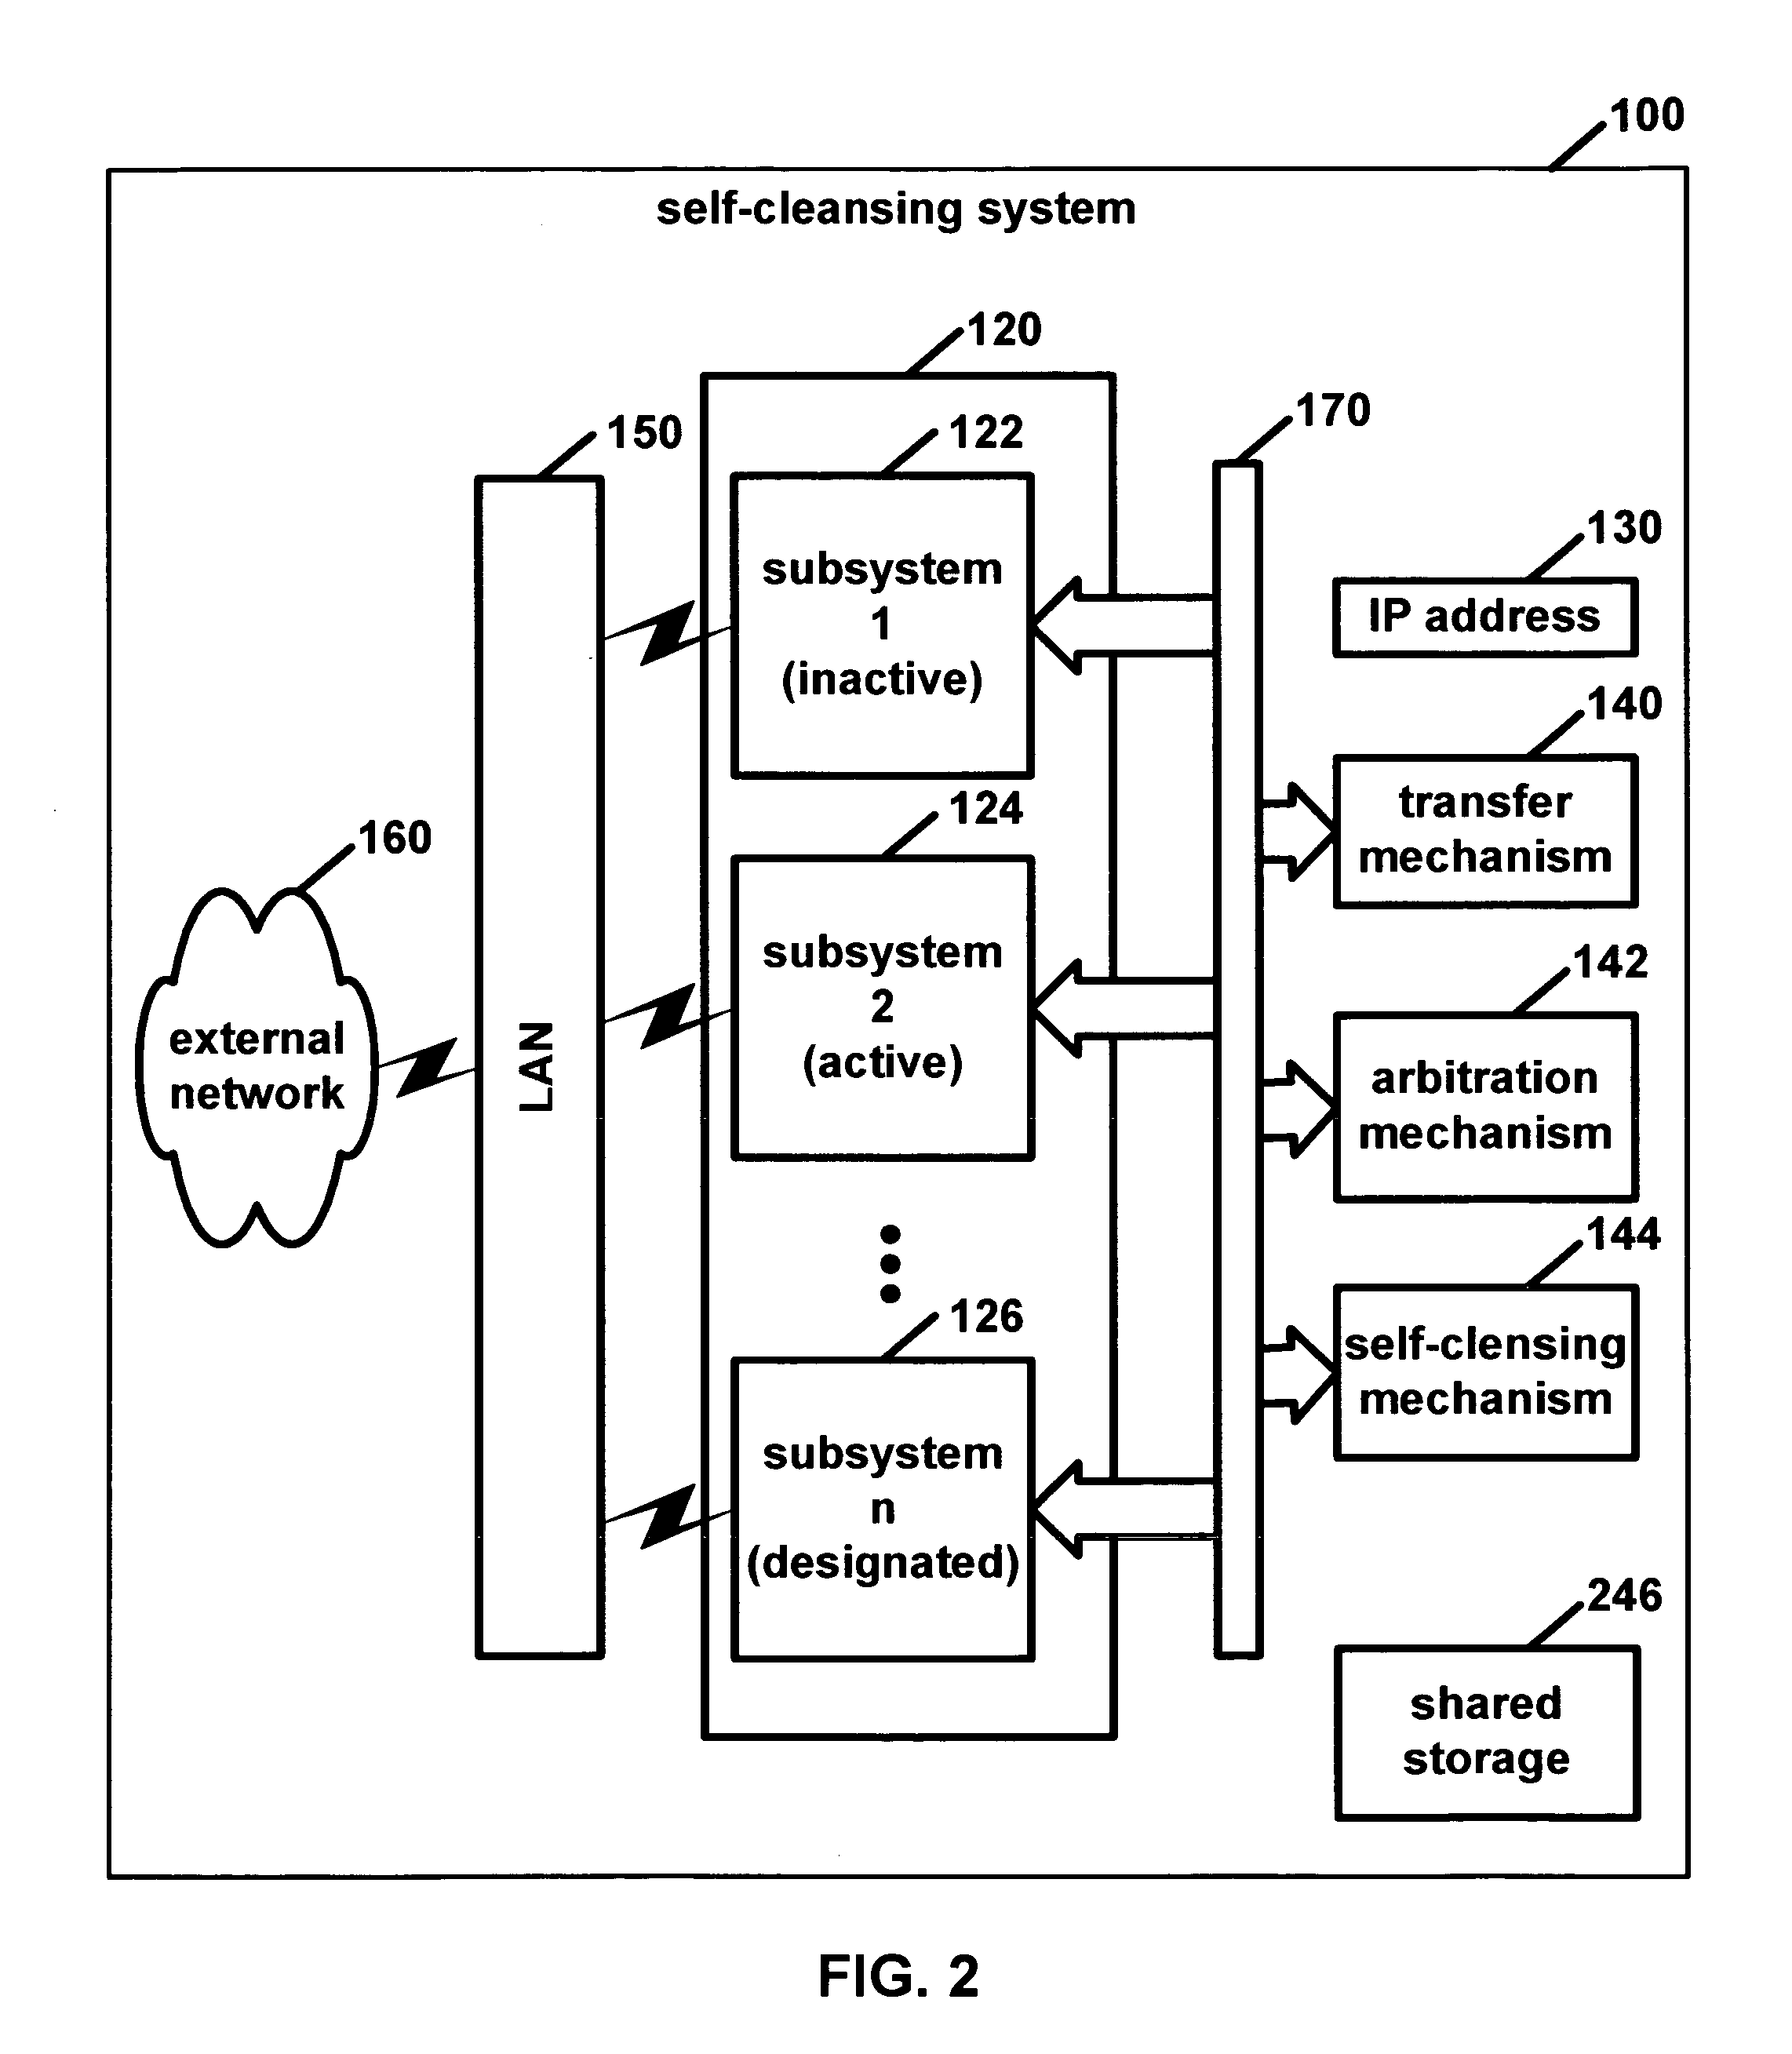 Self-cleansing system